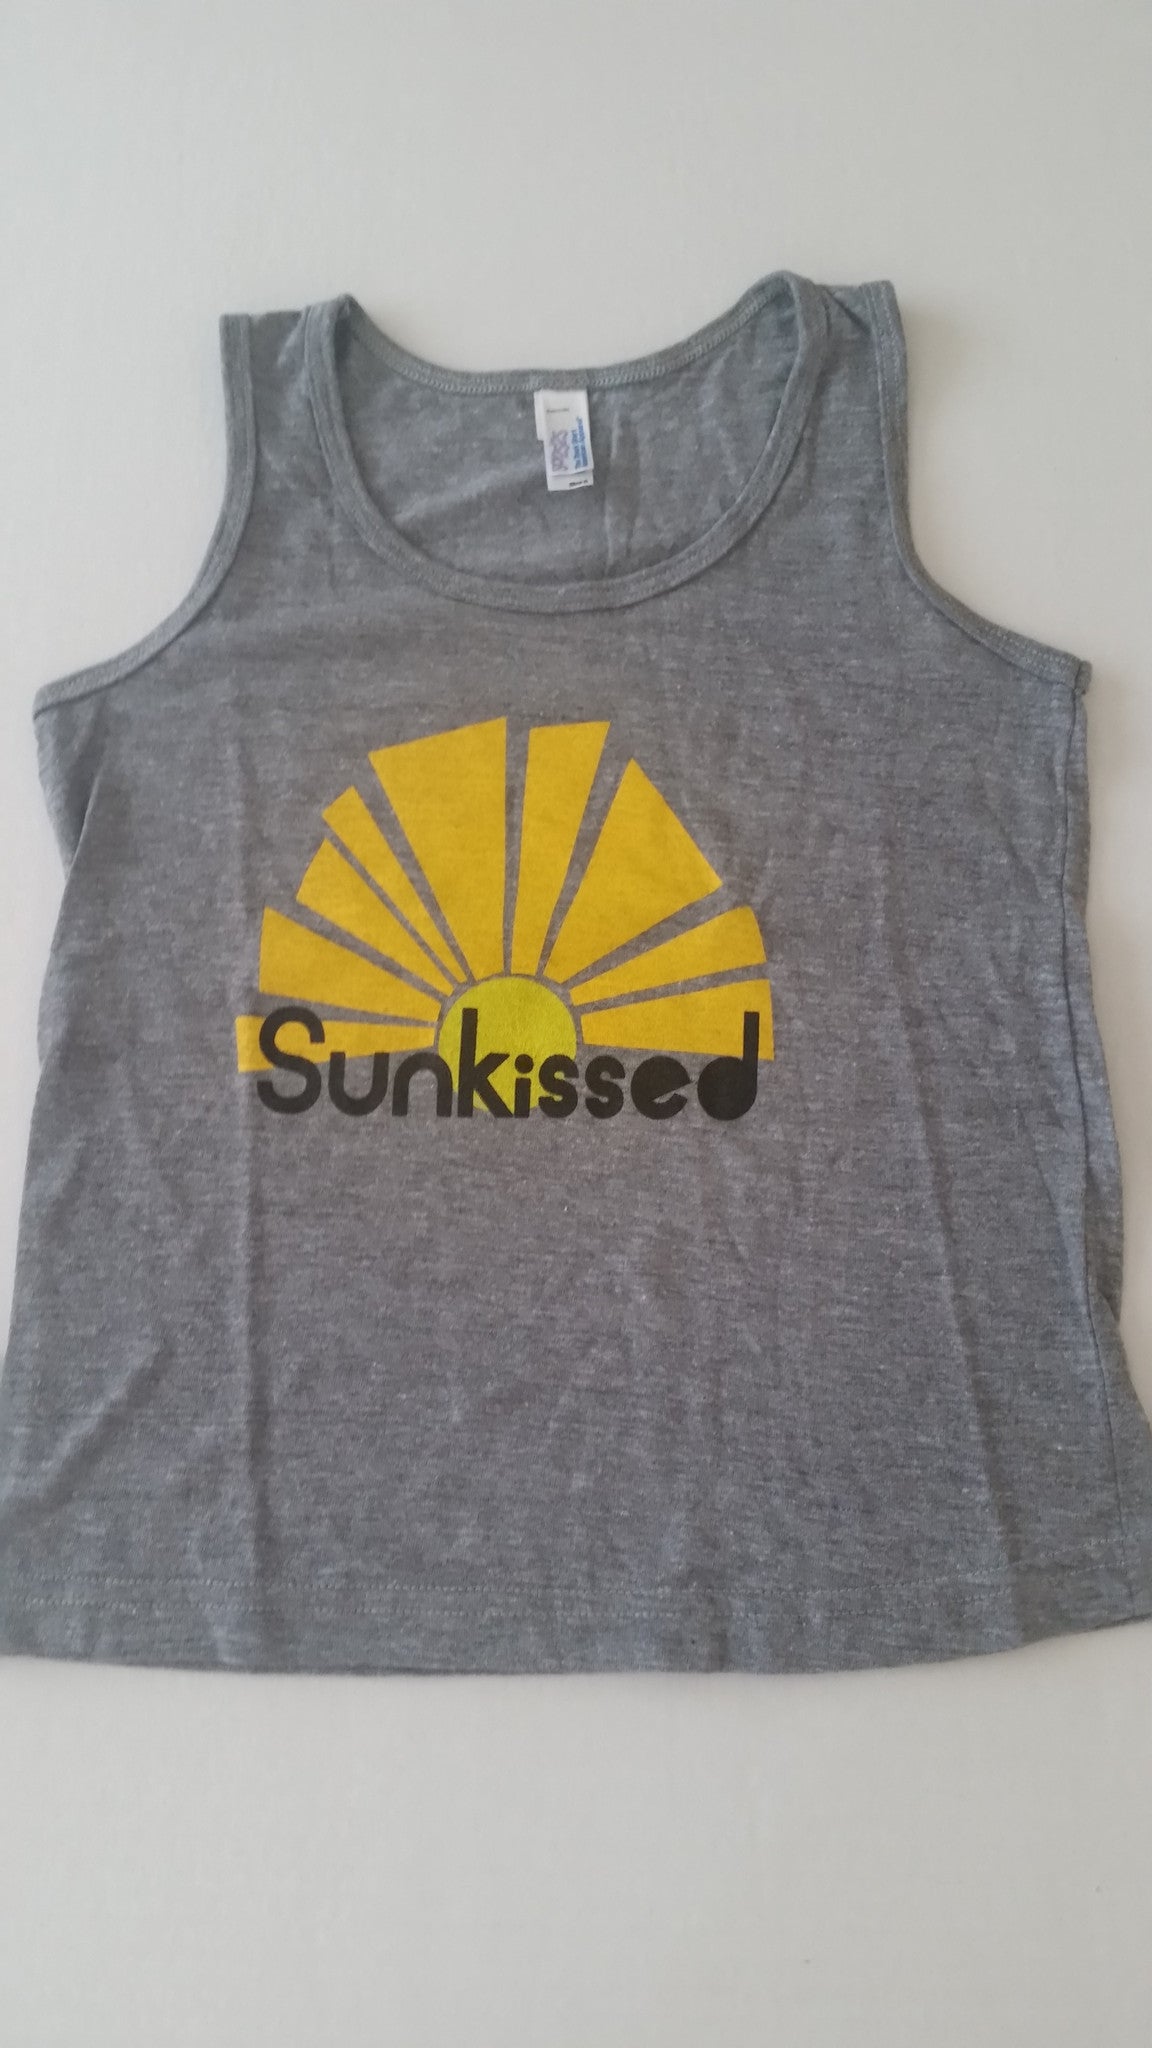 Tank Kids Sunkissed - Our Nation's Creations